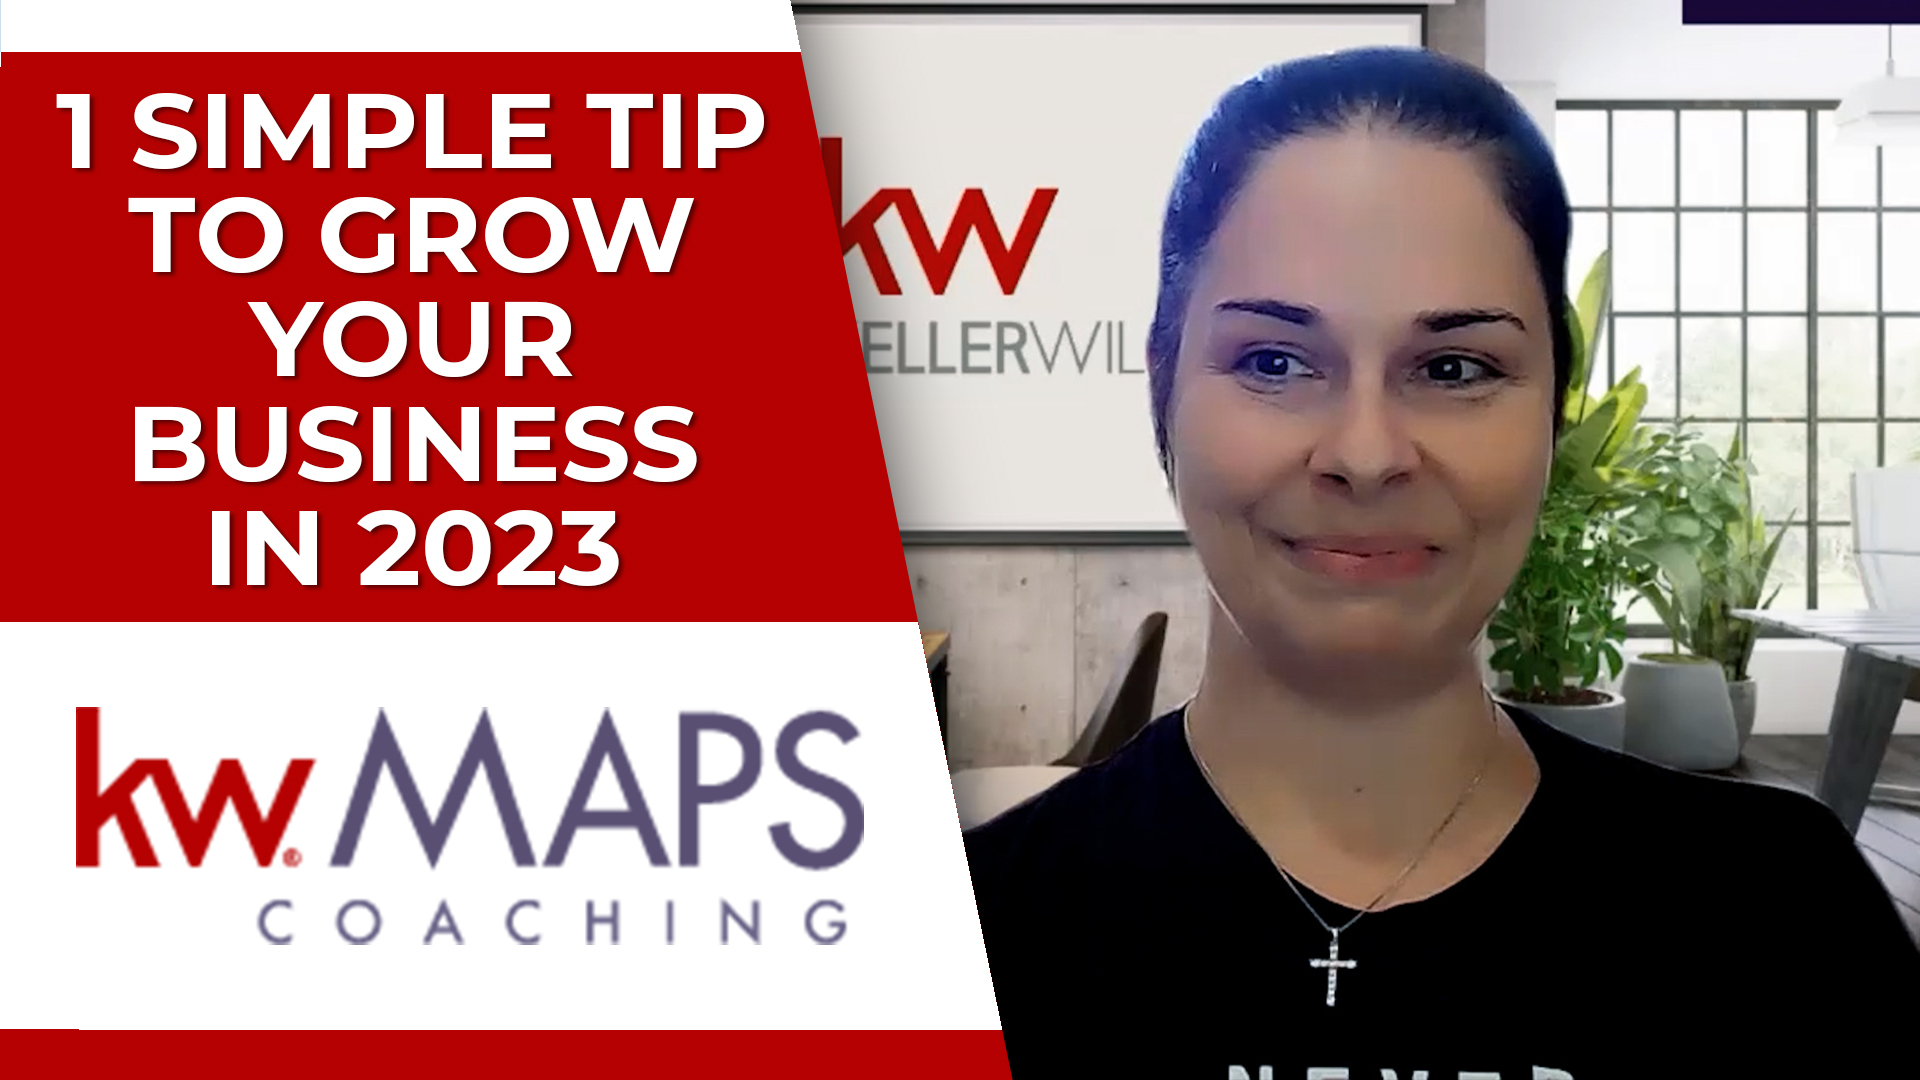 The Best Way To Grow Your Business in 2023